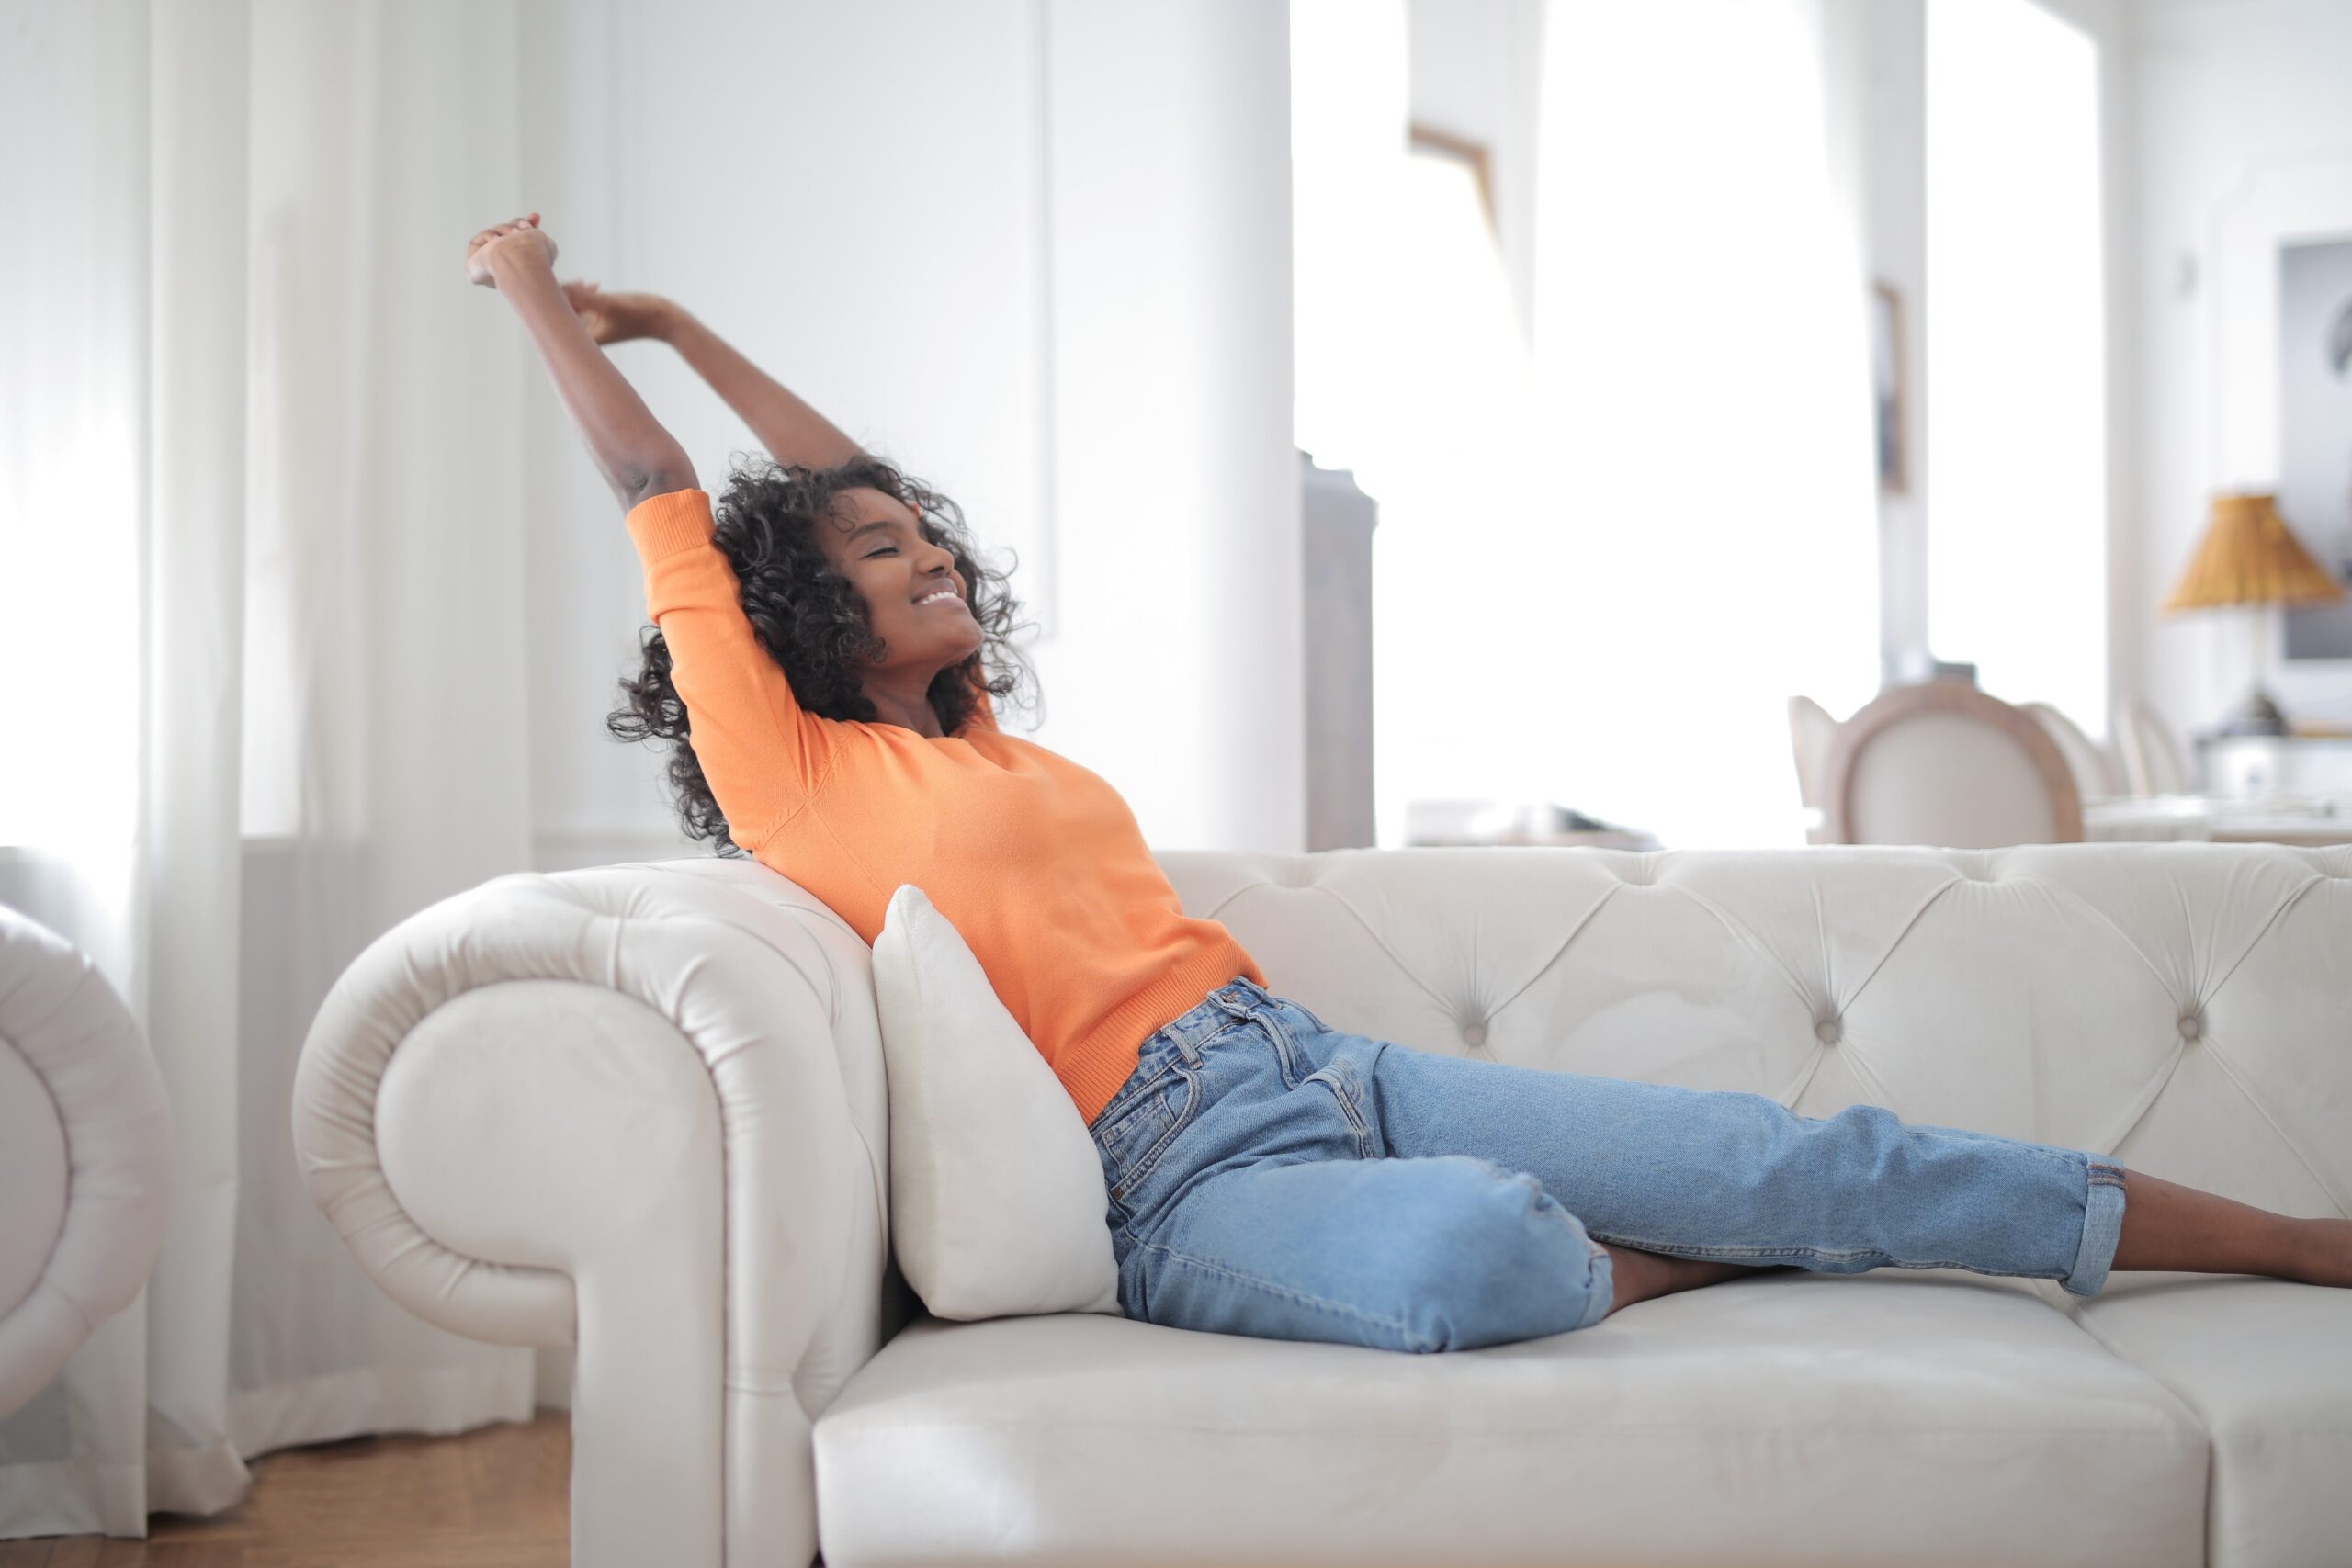 woman relaxing on couch and stretching her arms out